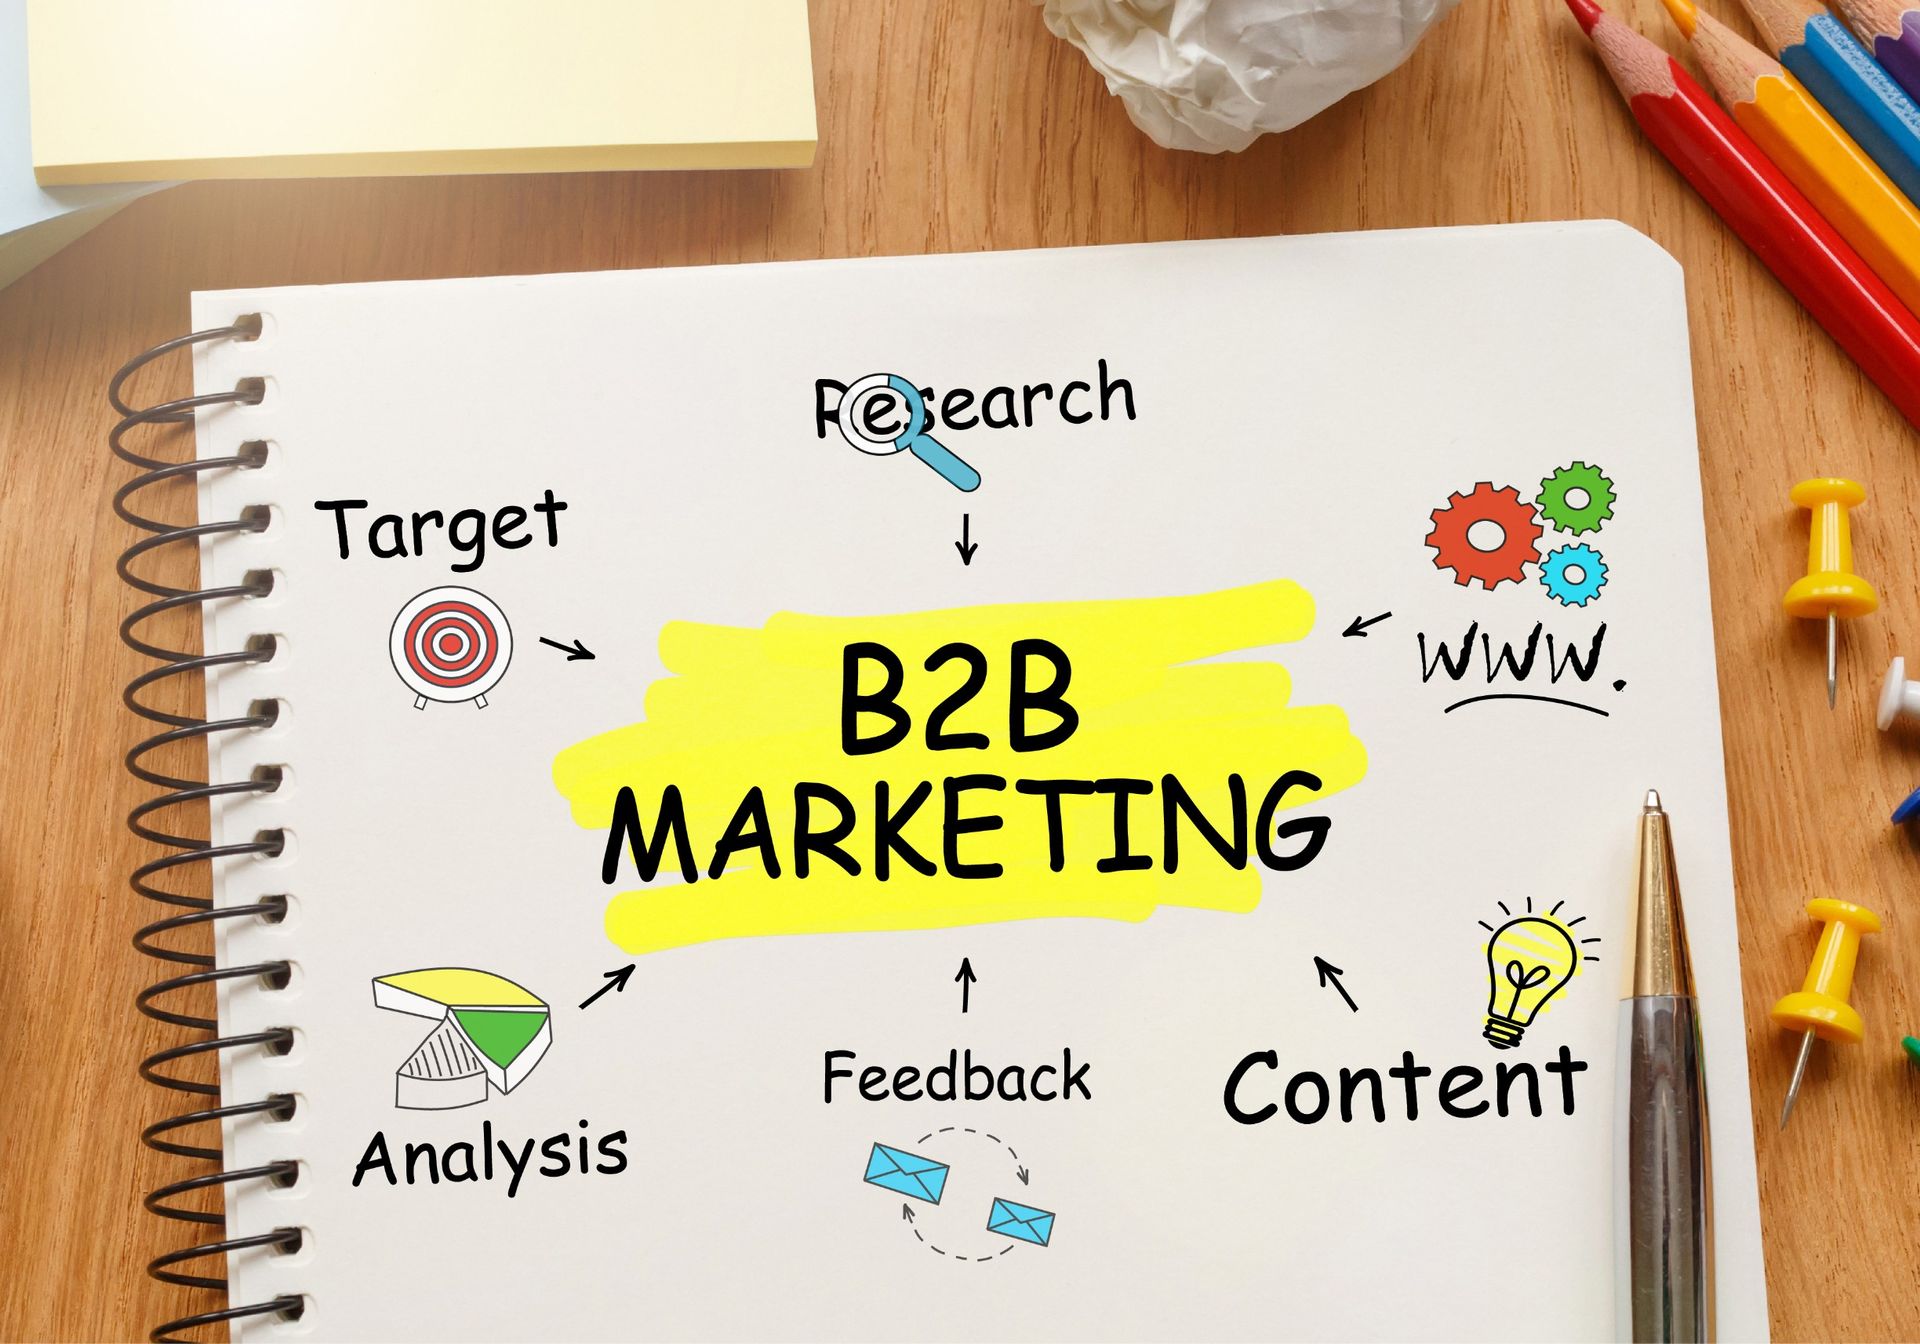 B2B Marketing Components on a notebook